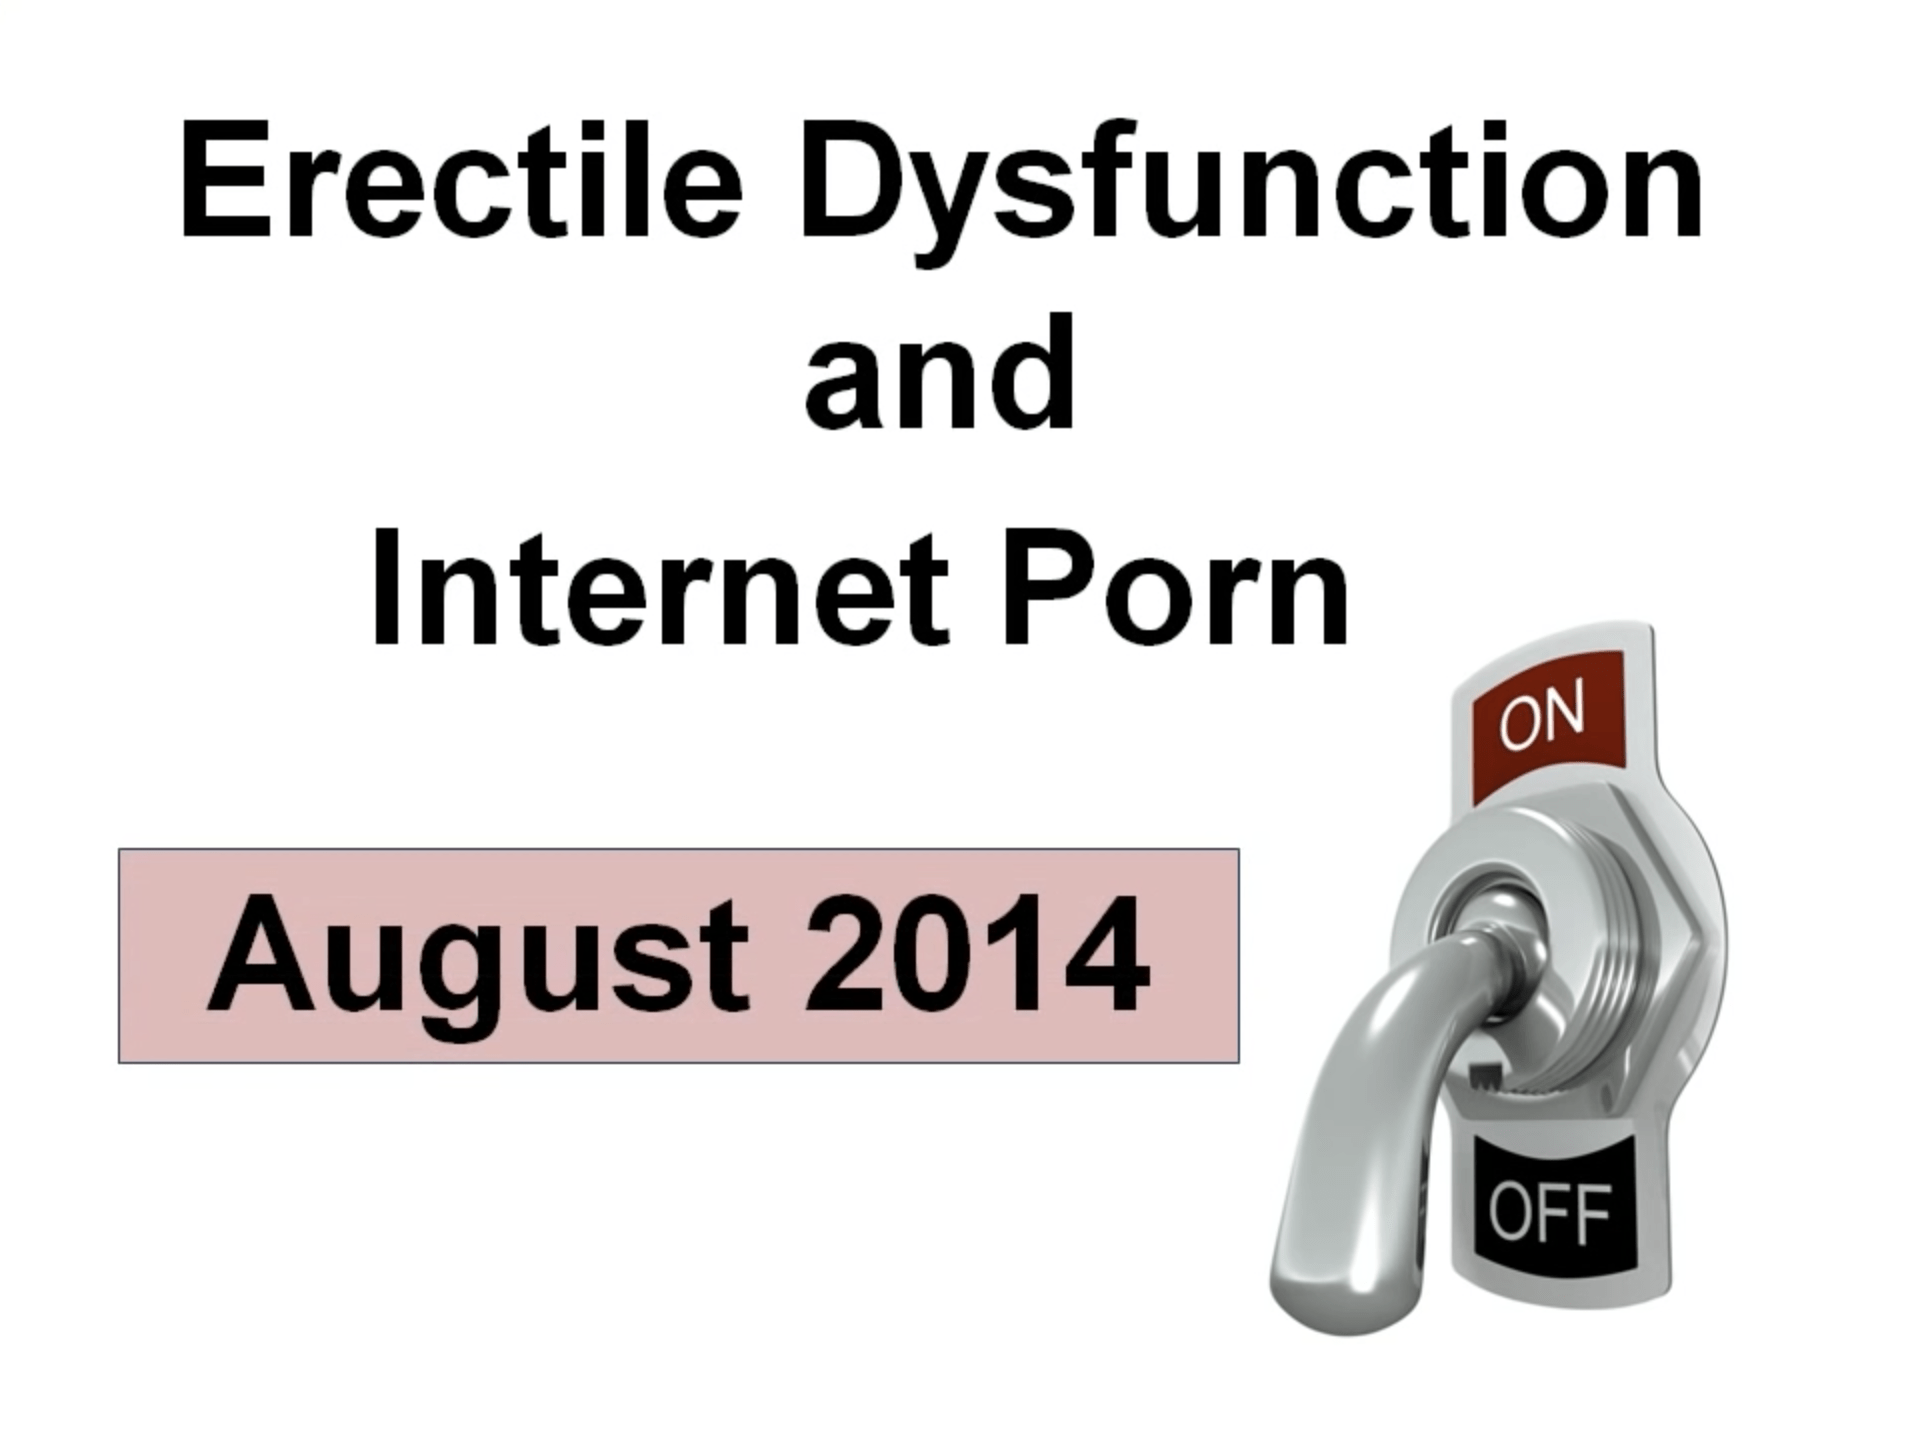 Porn-Induced Erectile Dysfunction (2014) - Your Brain On Porn